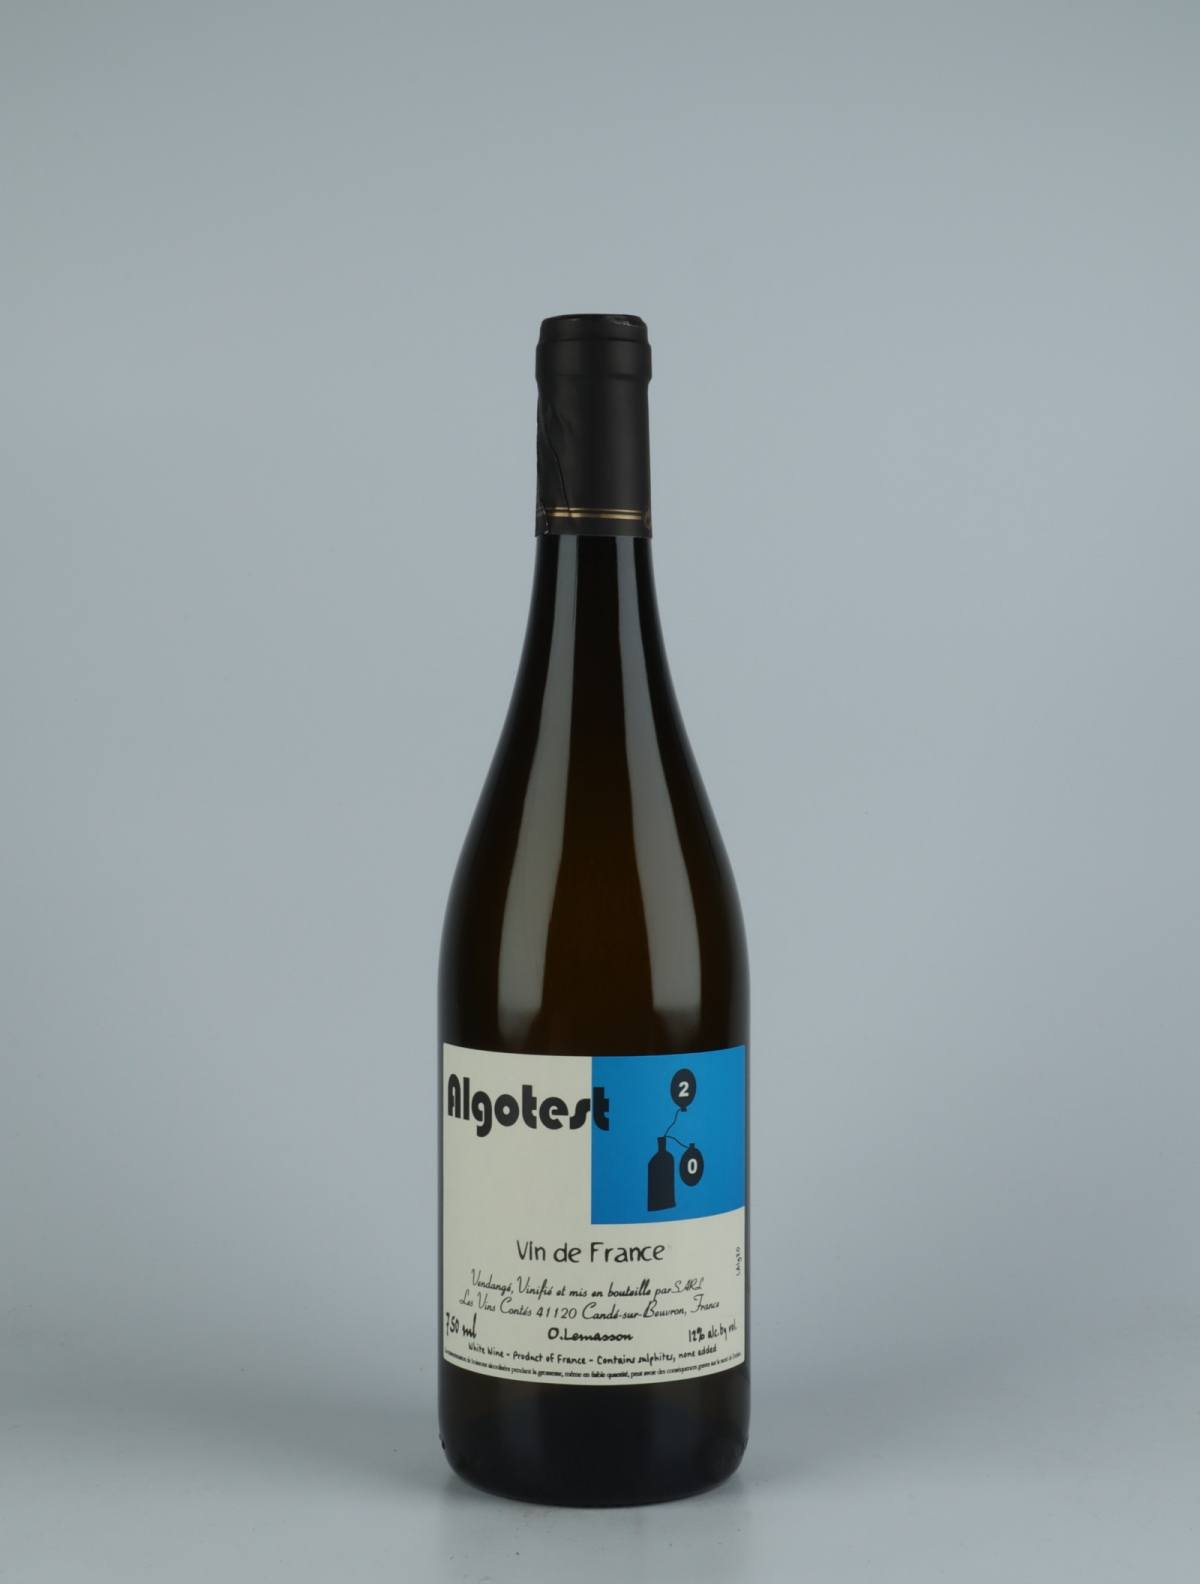 A bottle 2020 Algotest White wine from Olivier Lemasson, Loire in France